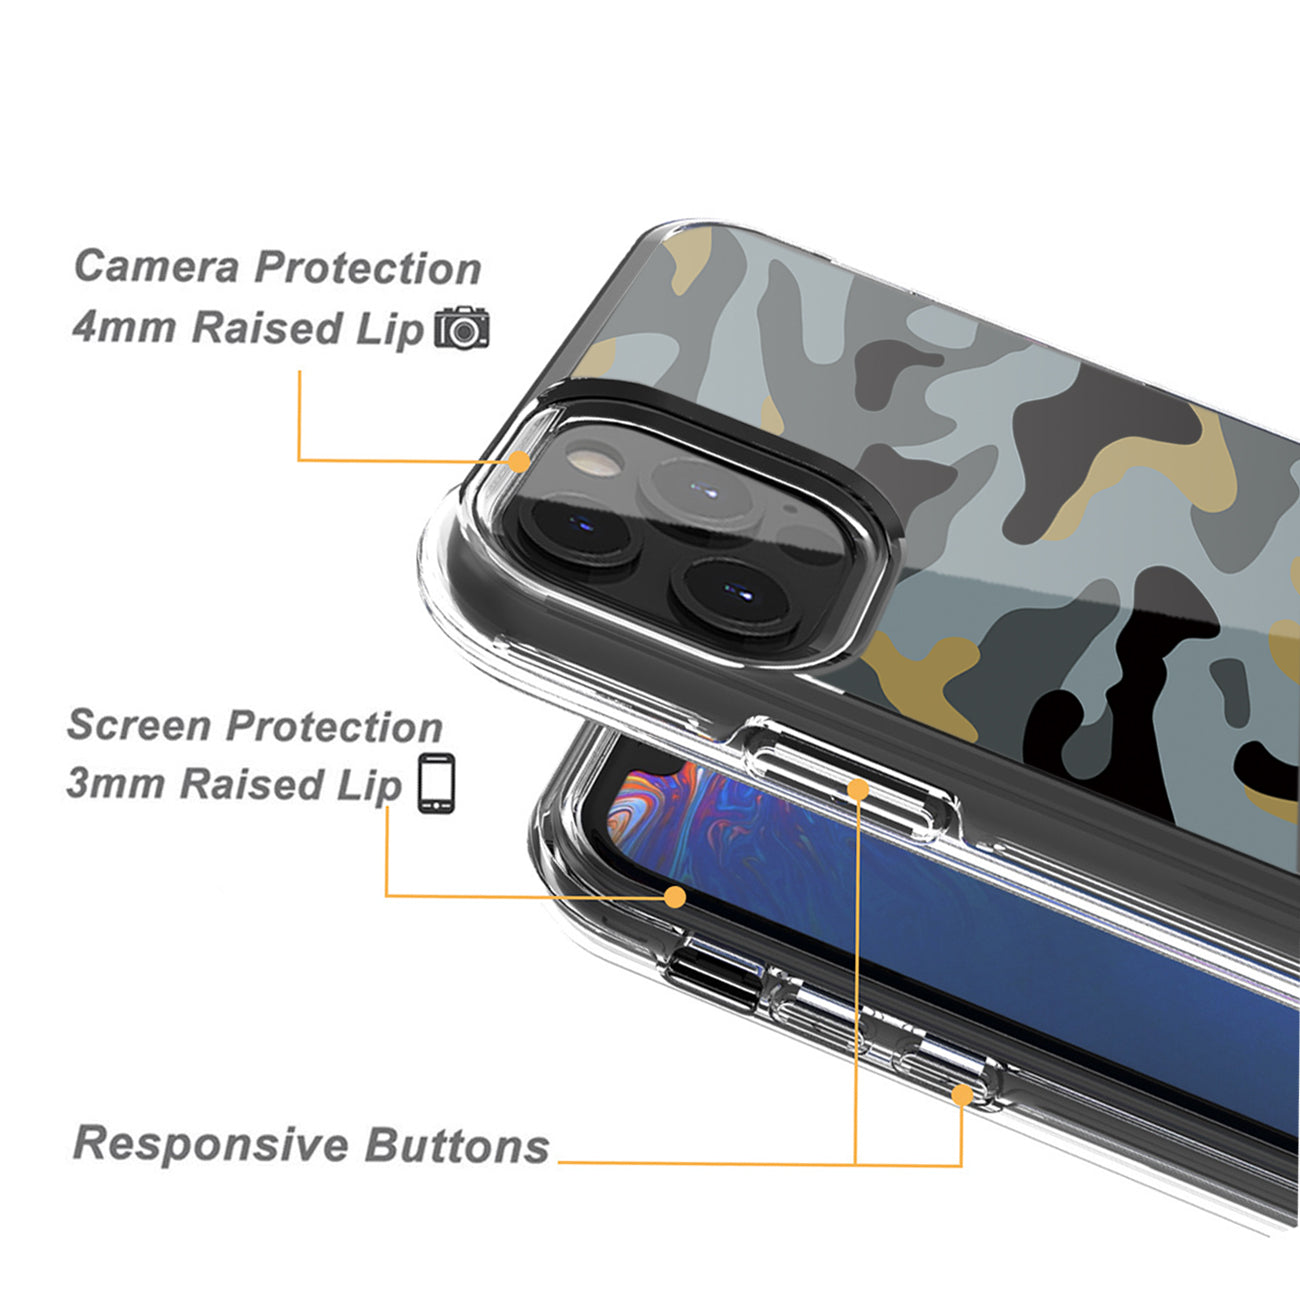 Camouflage Dual Layer Hybrid Hard & Soft TPU Rubber Case for IPH 12/IPH 12 PRO In Blue